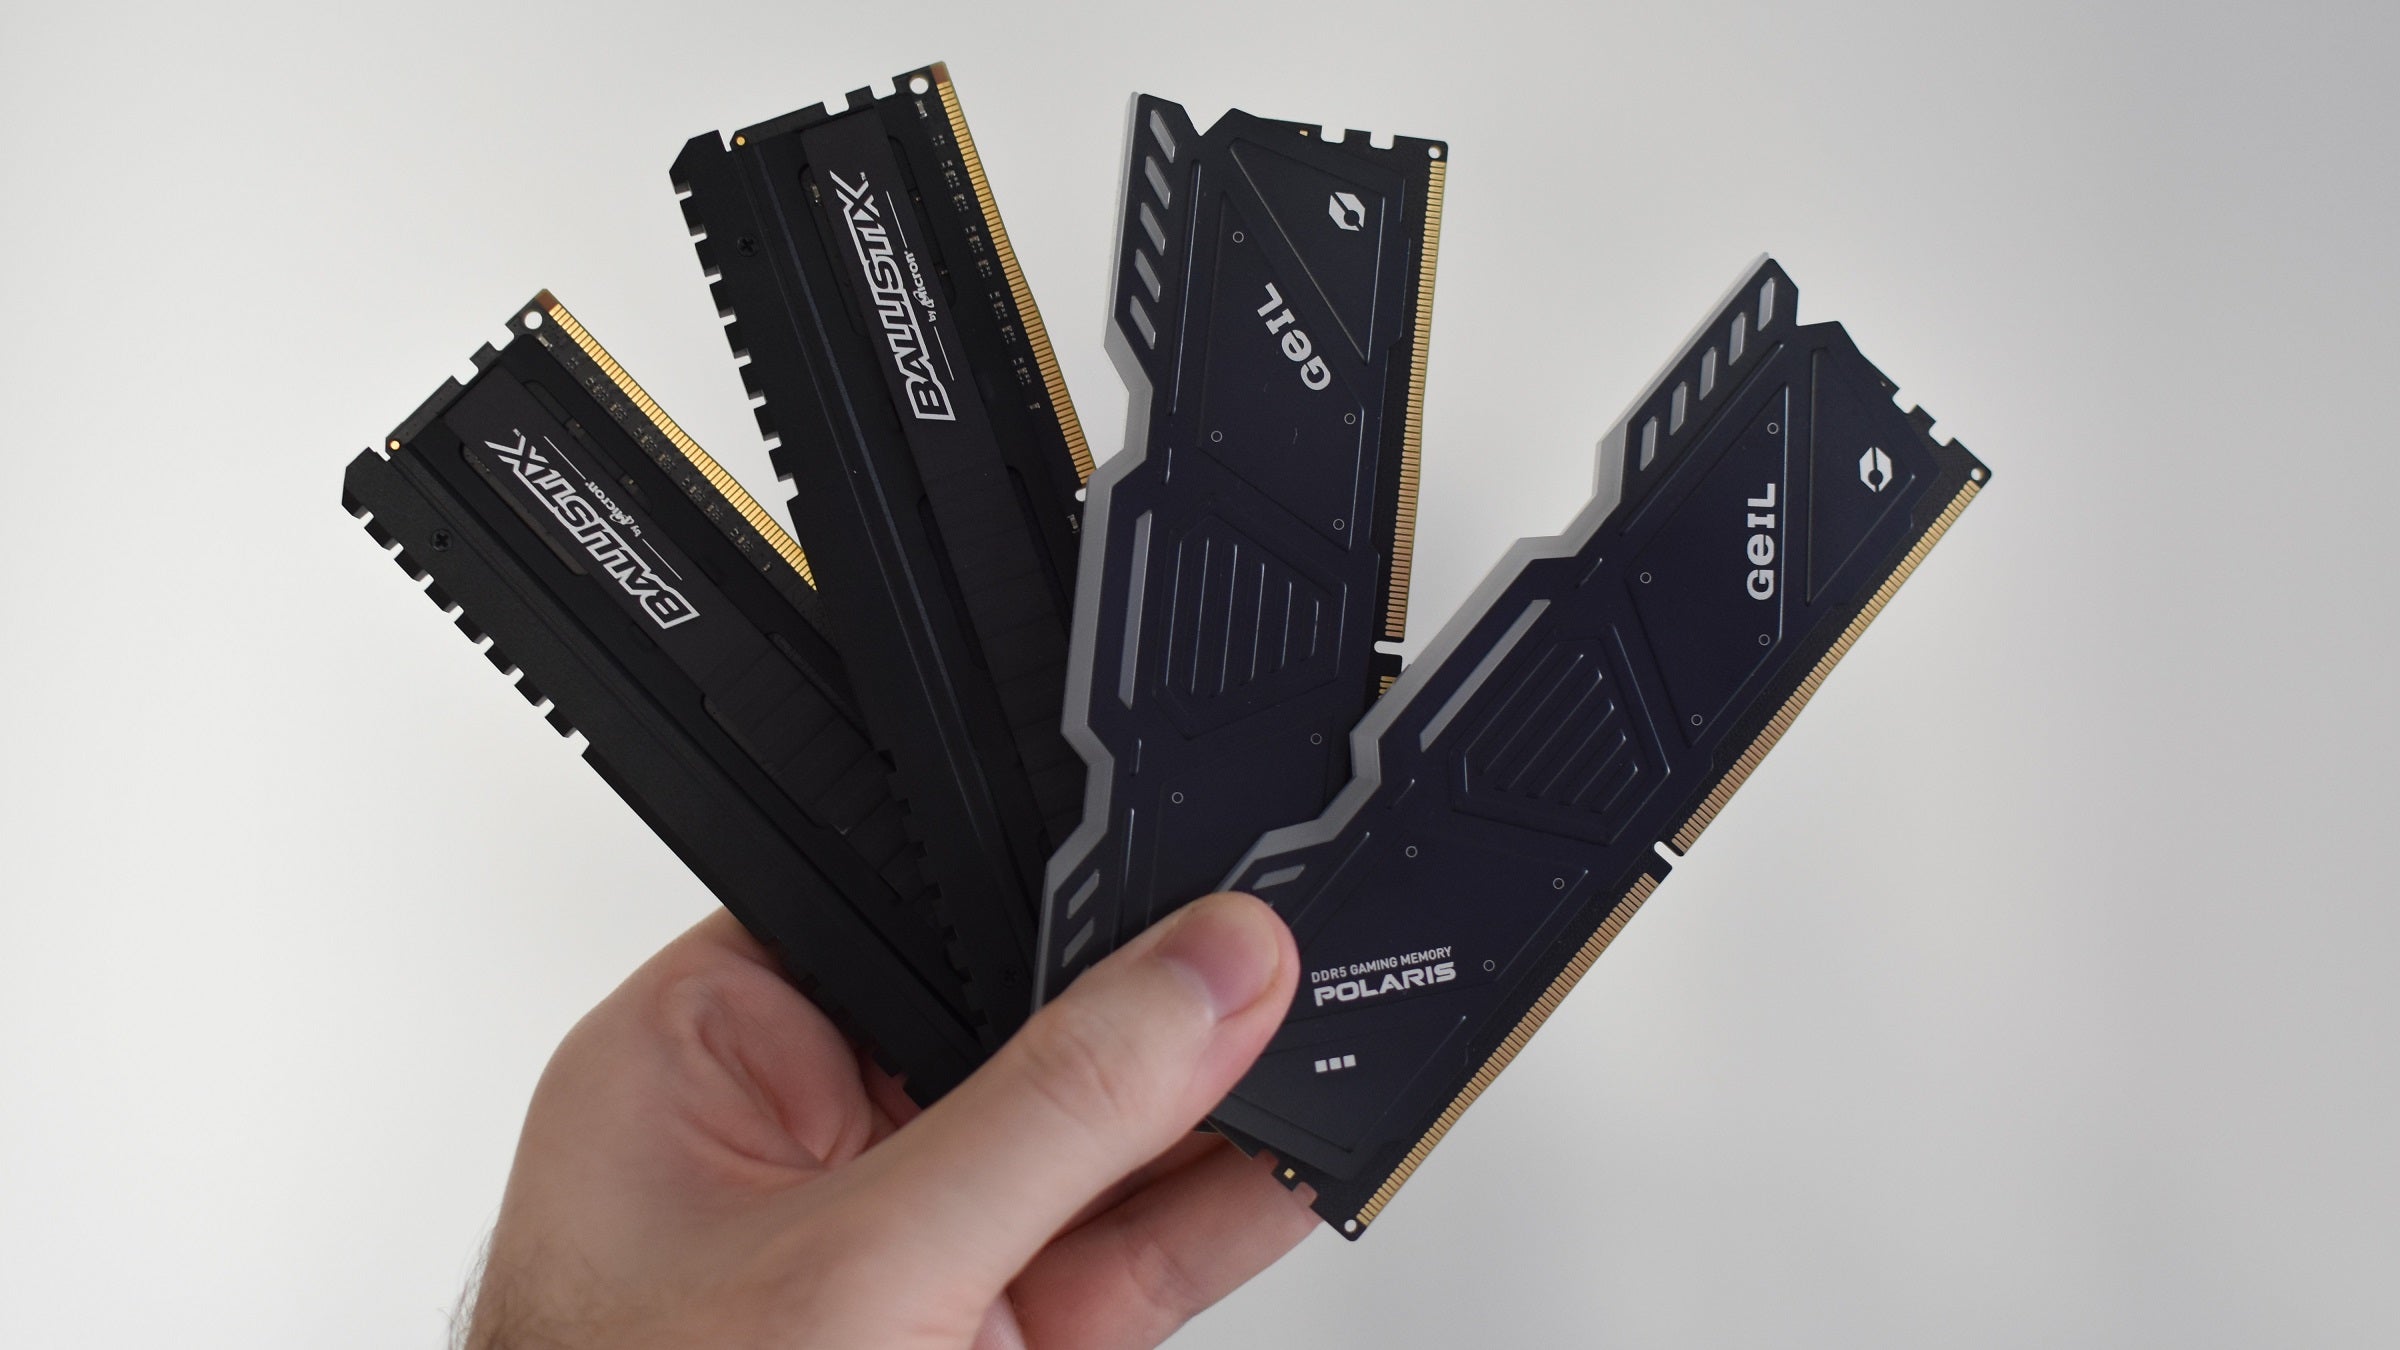 Some DDR4 and DDR5 RAM modules being held up.